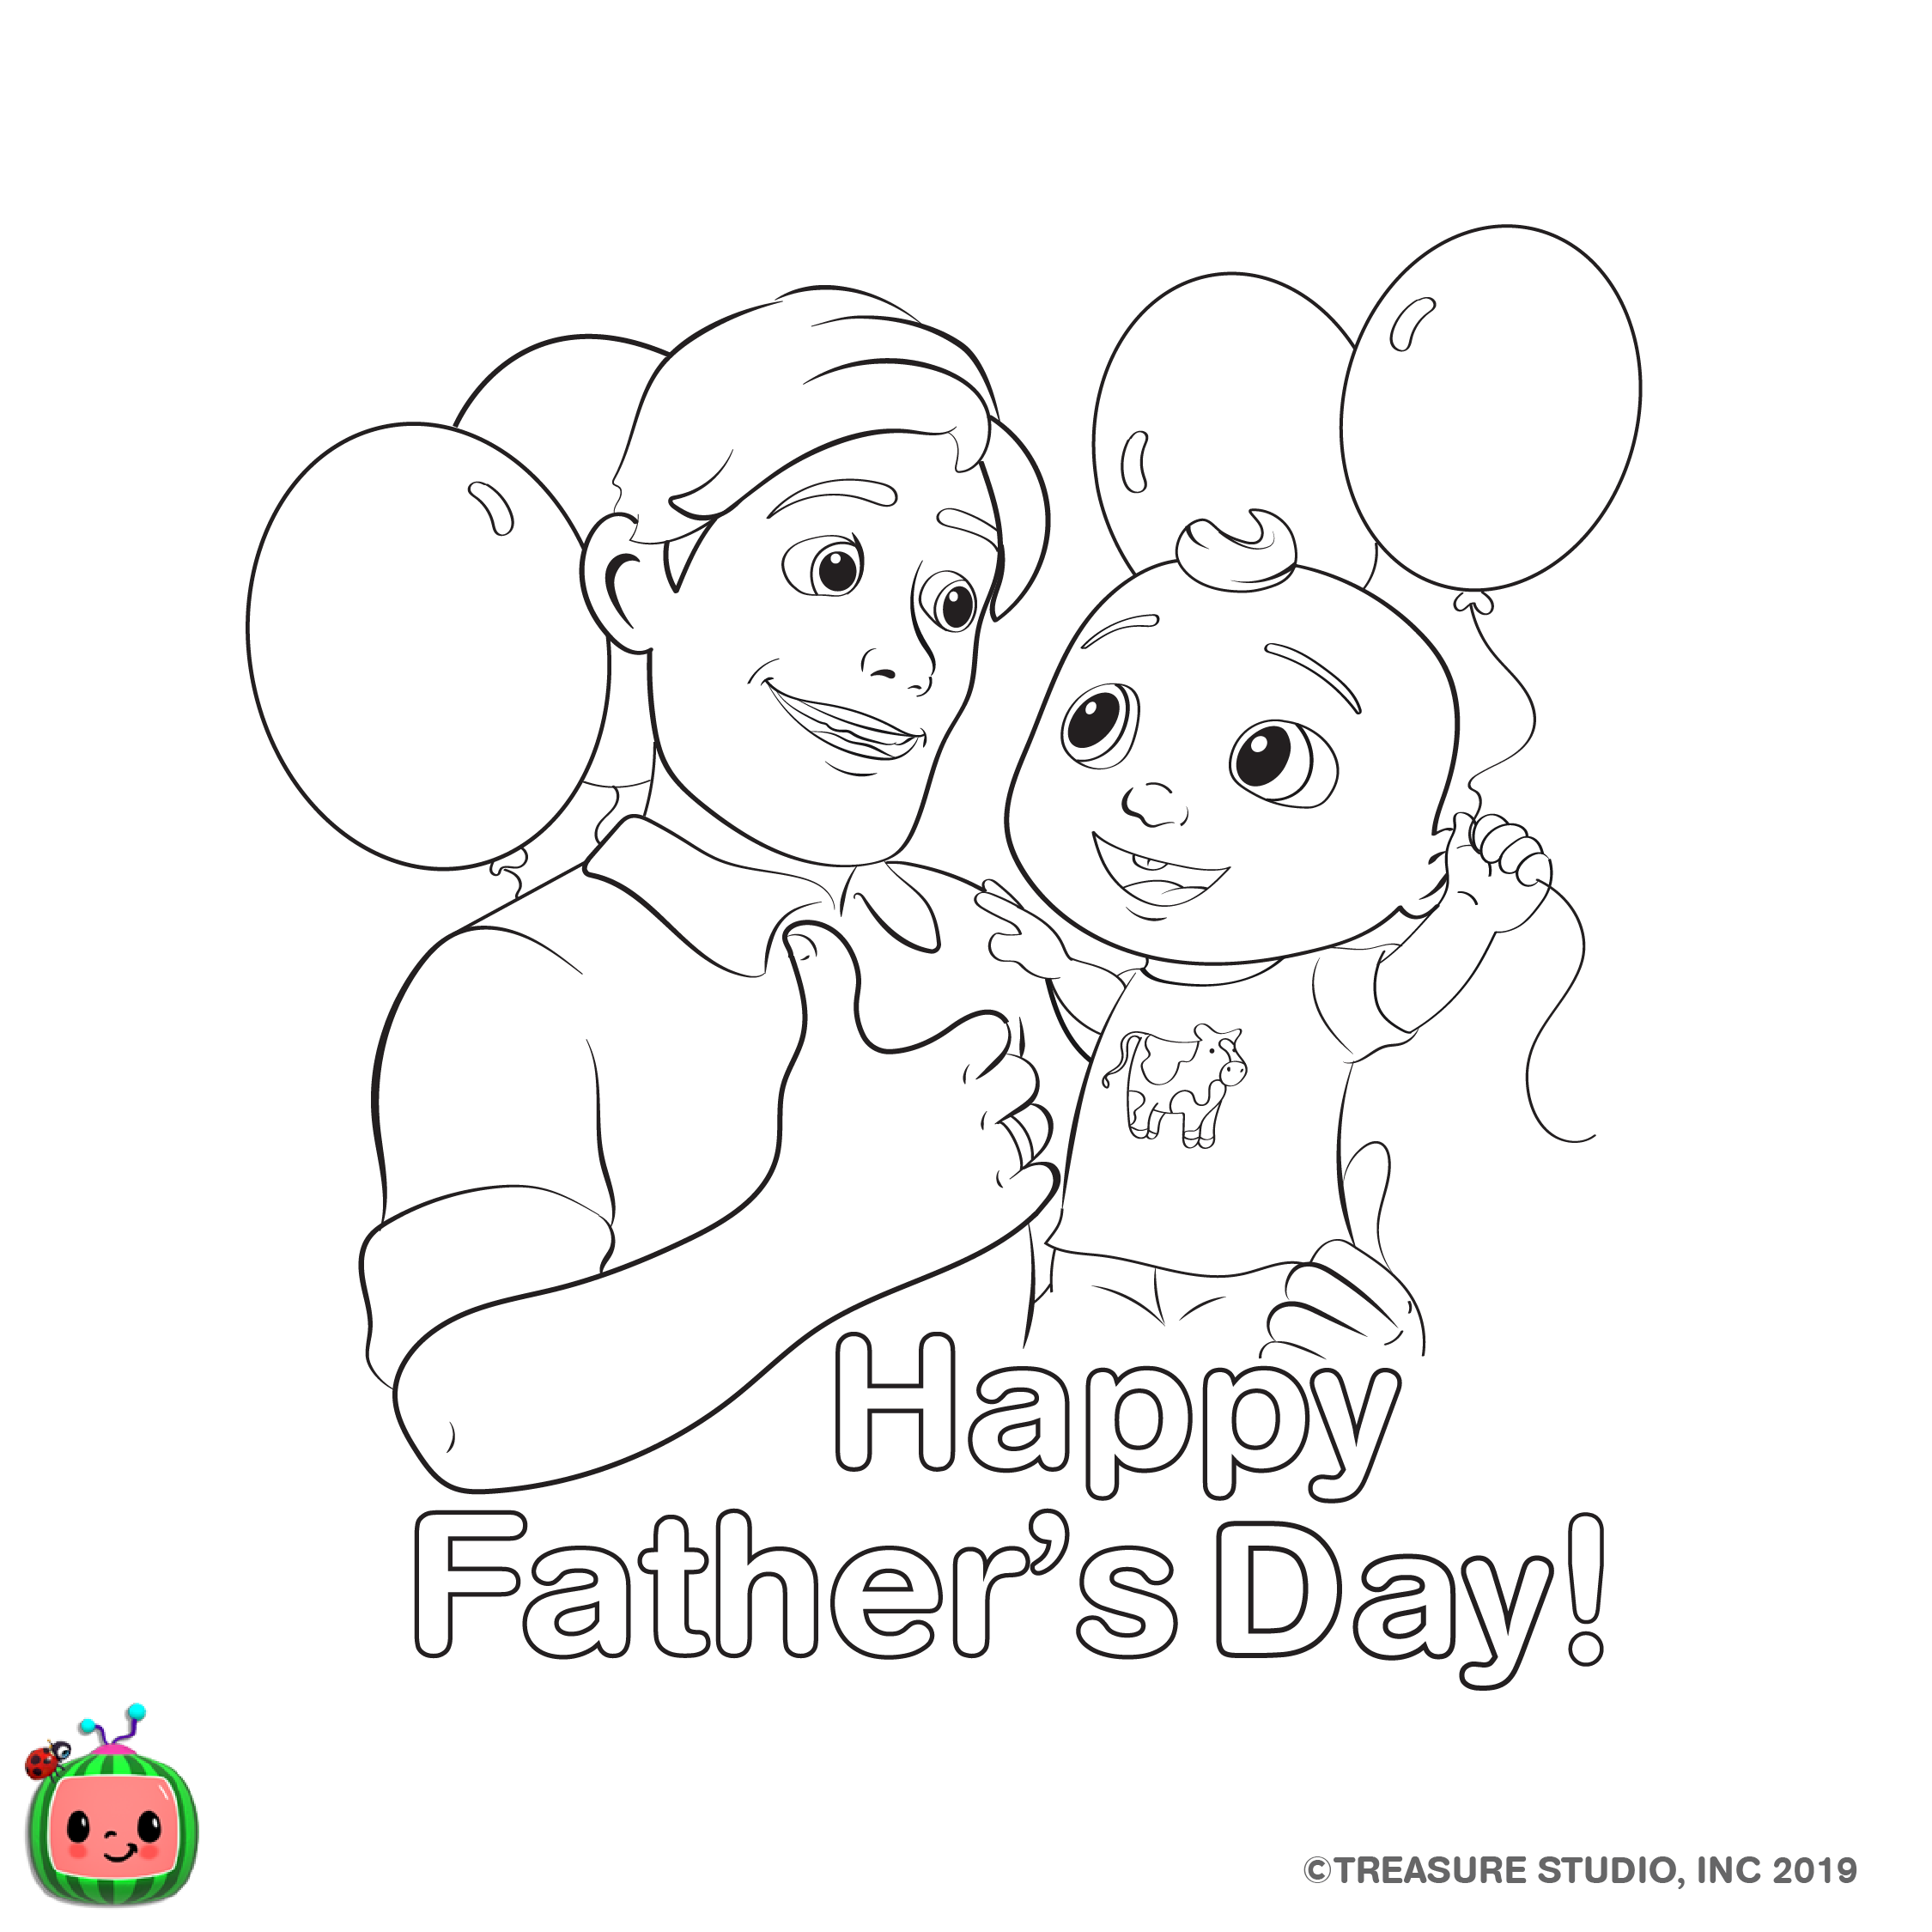 Father’s Day - 